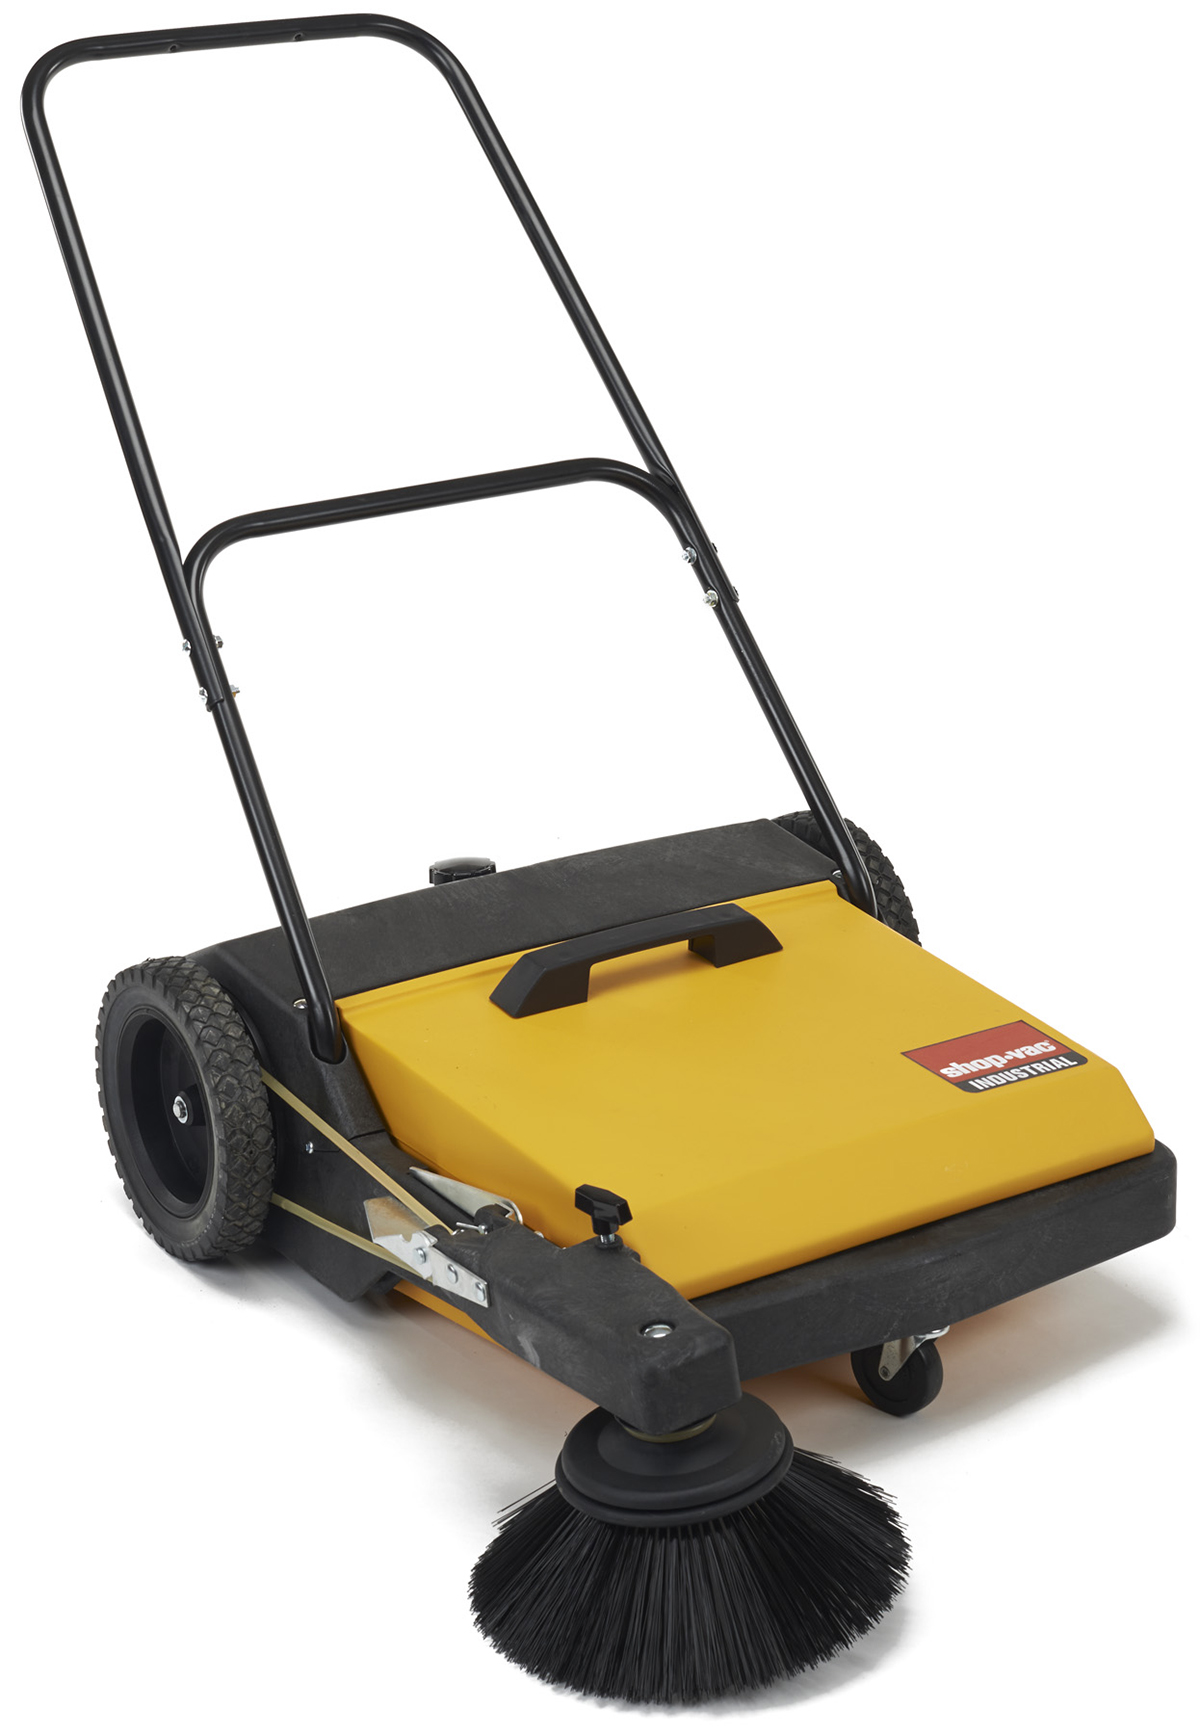 Shop-Vac Industrial Push Sweeper, 3050010 - image 1 of 7